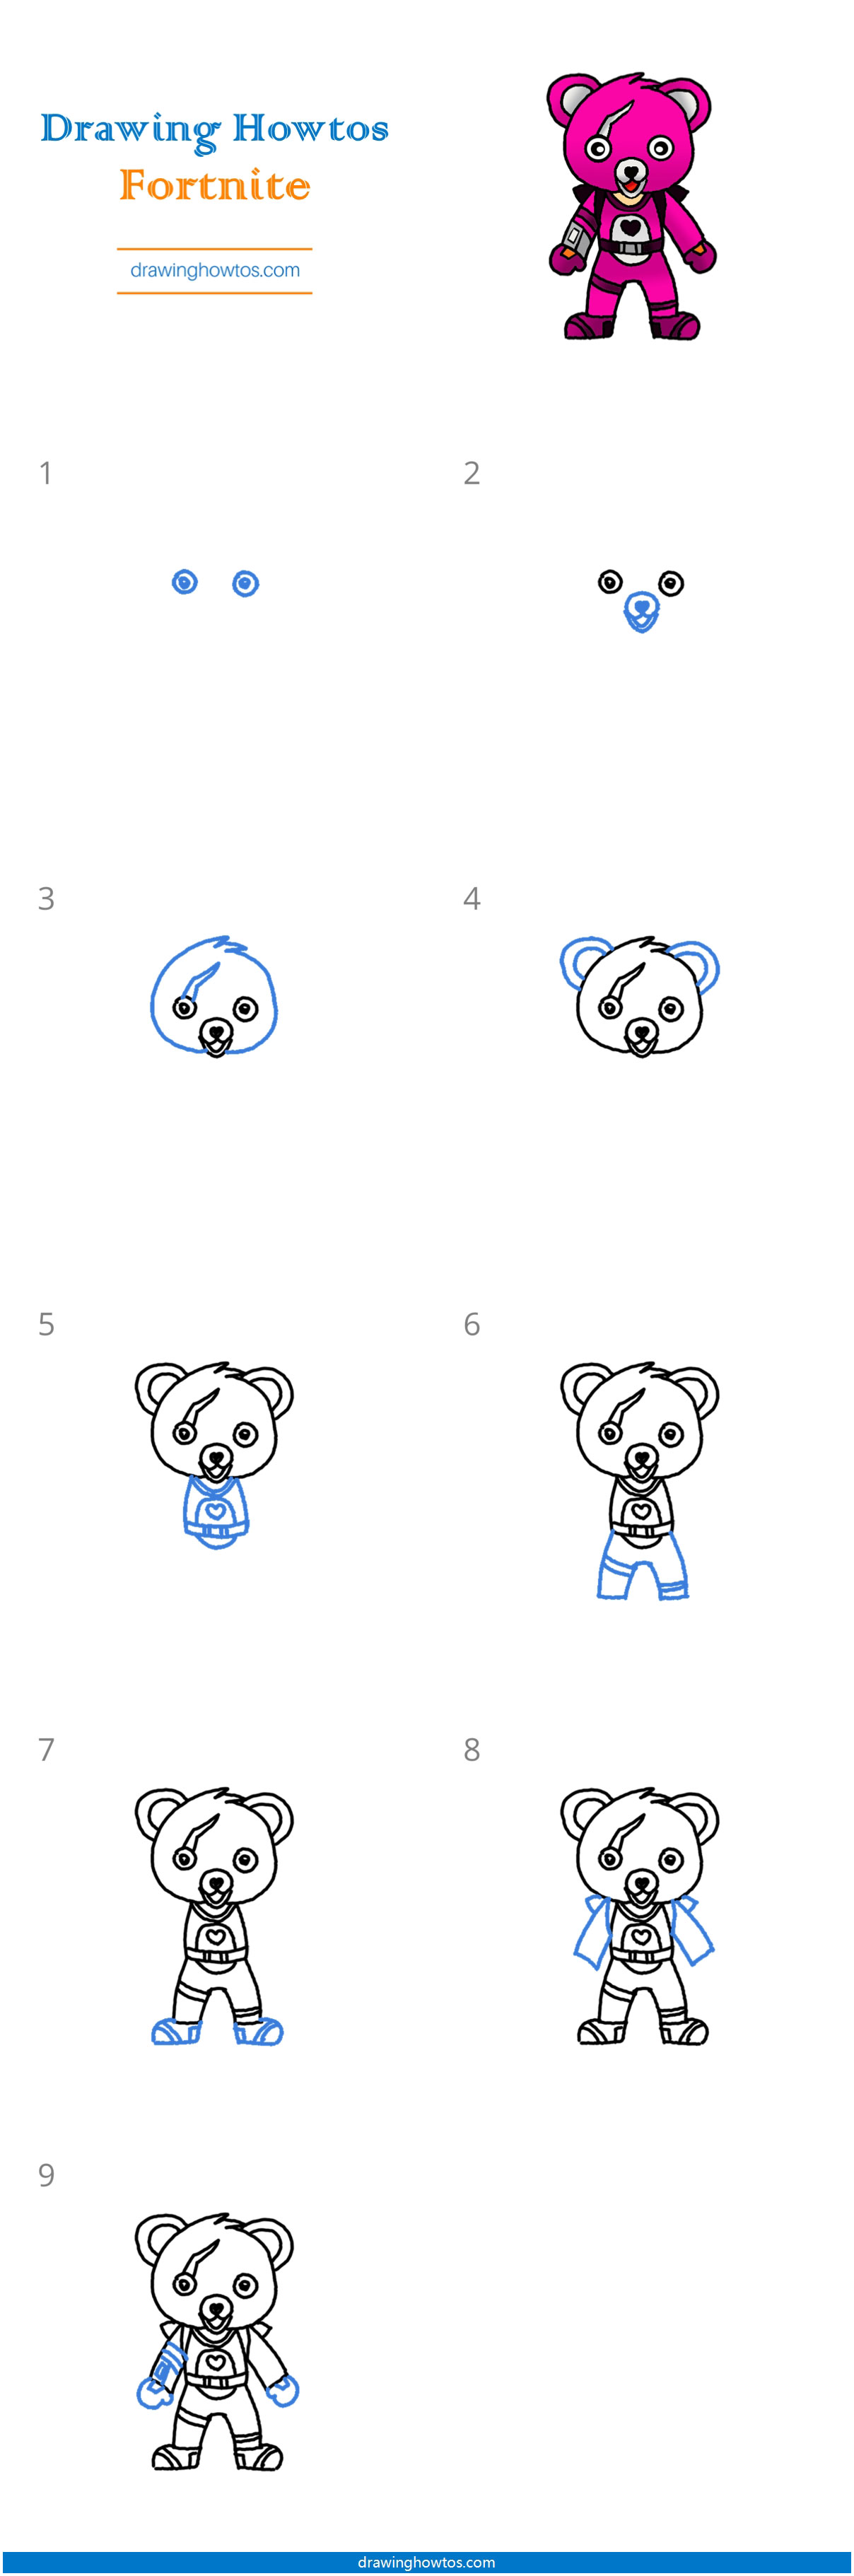 How to Draw Cuddle Team Leader from Fortnite - Step by Step Easy ...